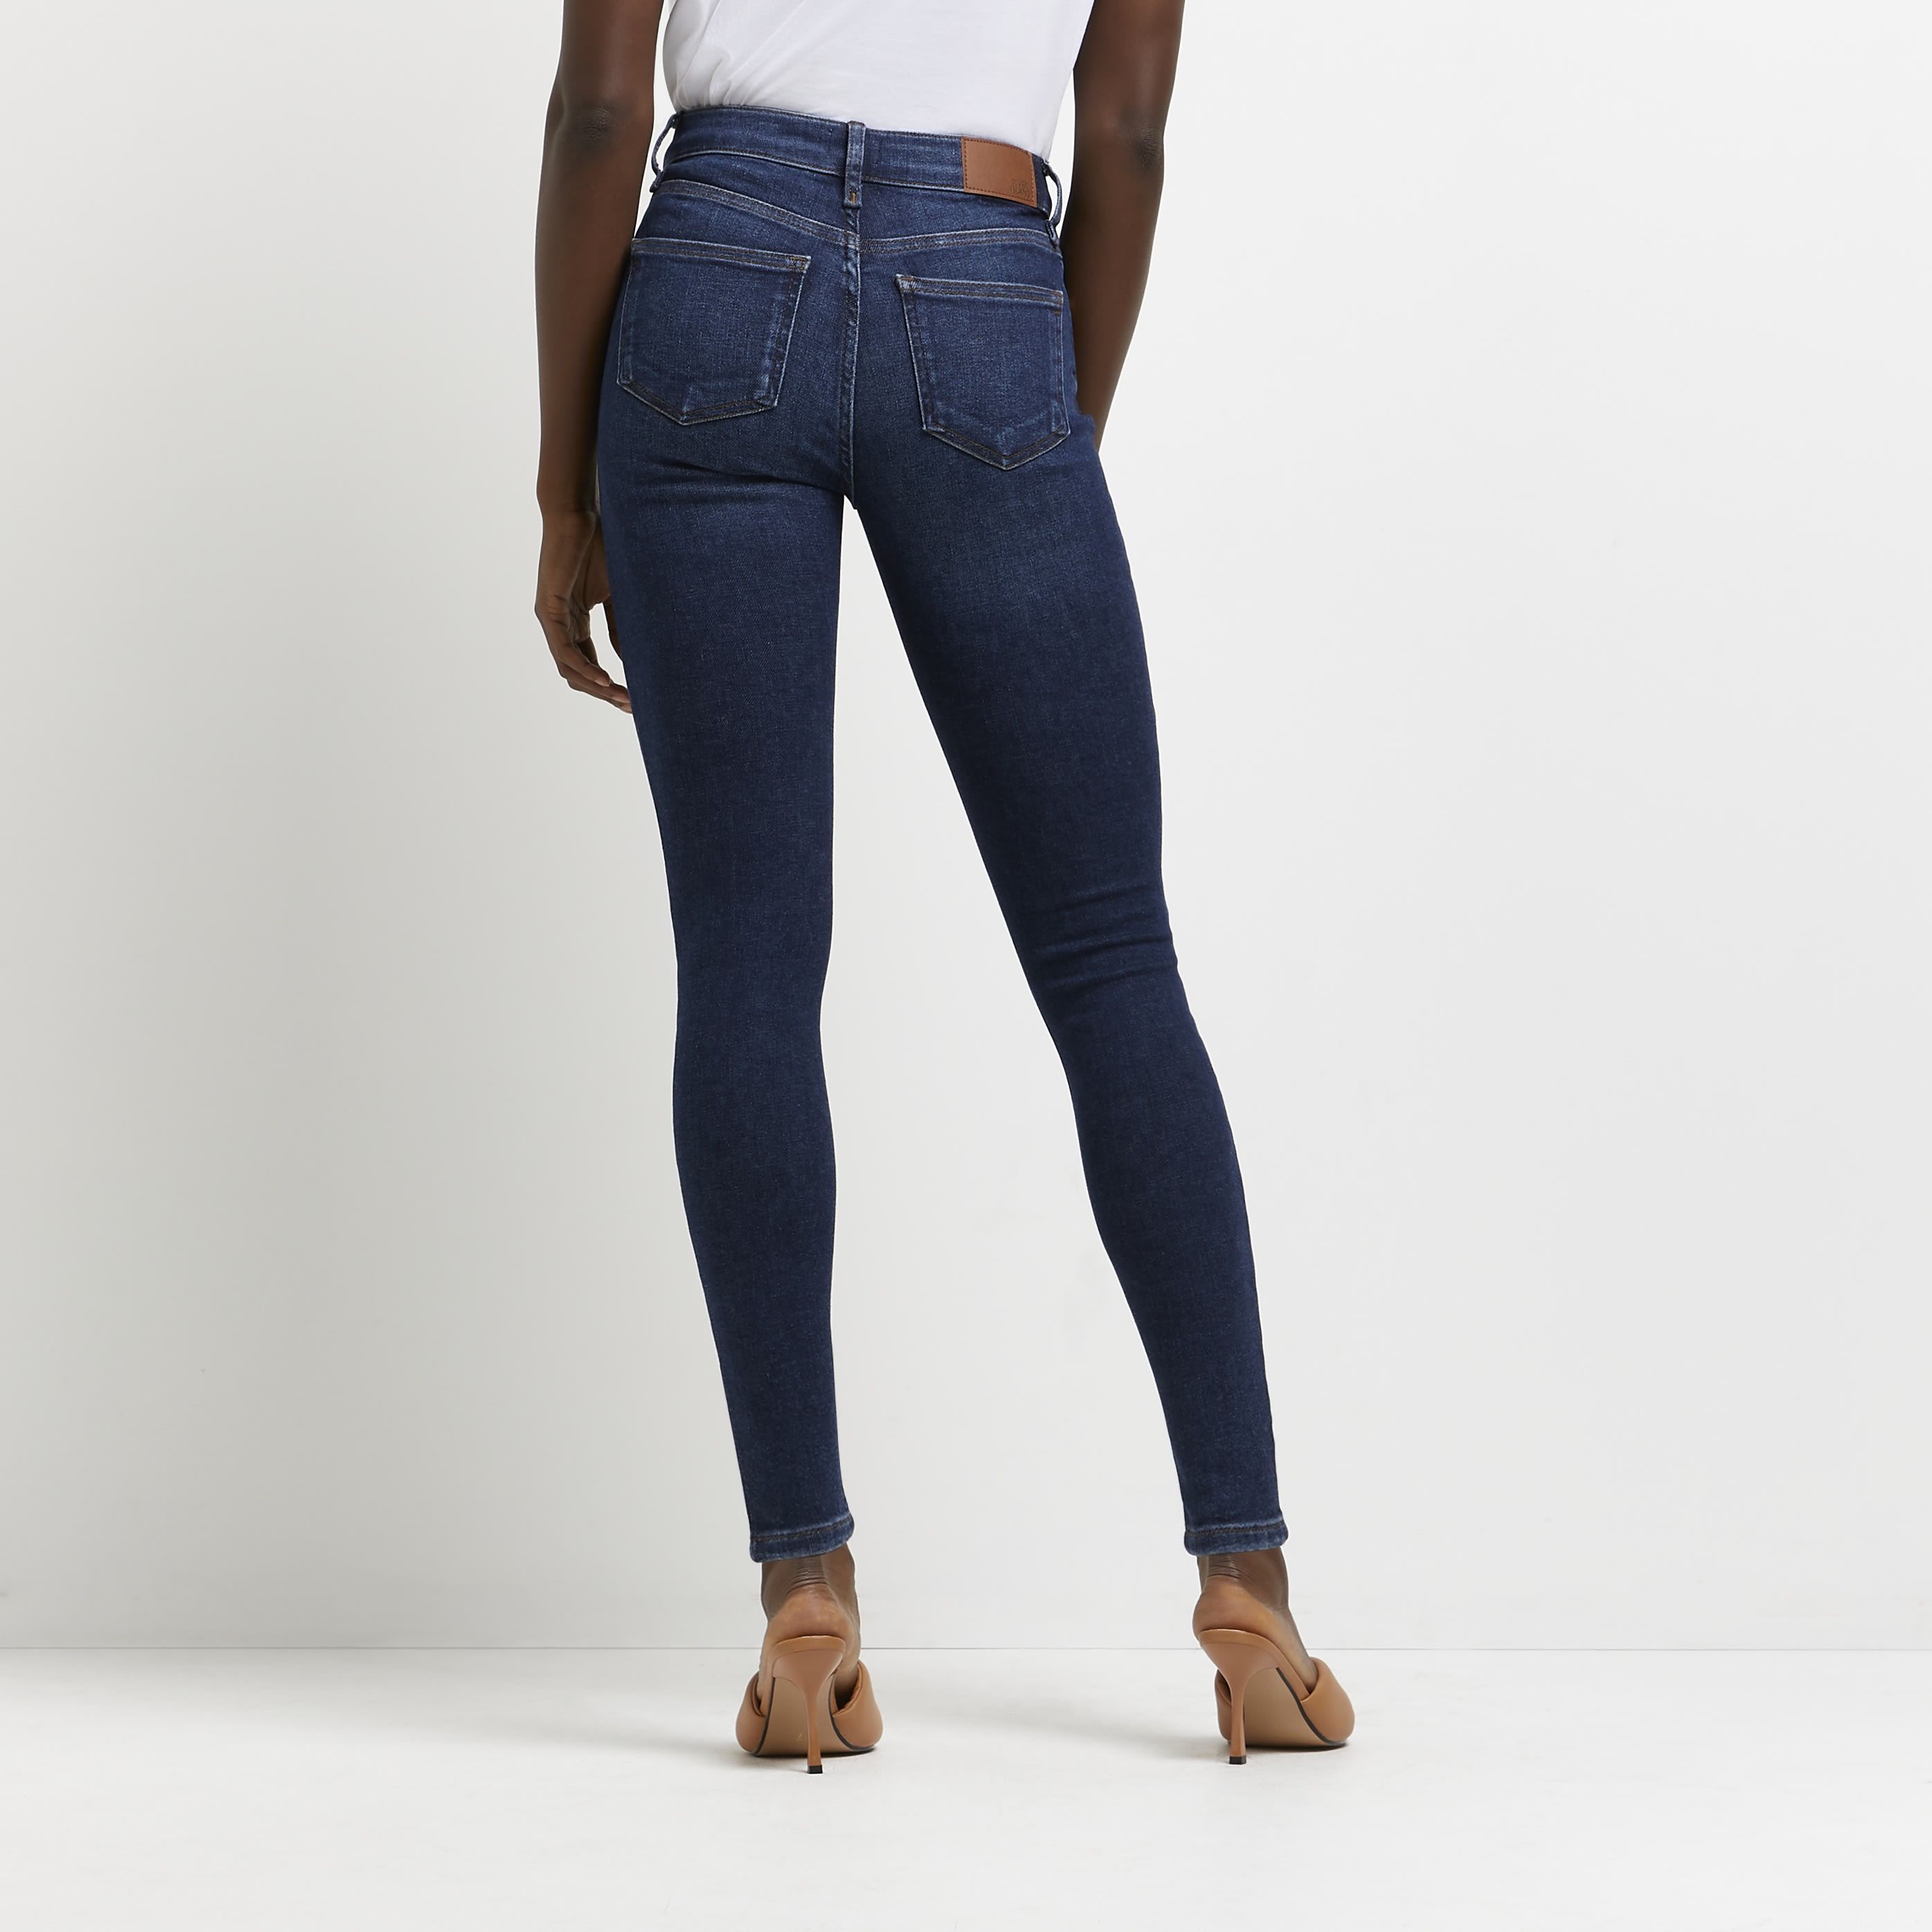 > Brand: River Island> Department: Women> Colour: Denim> Type: Jeans> Style: Straight> Material Composition: 94% Cotton 4% Elastomultiester 2% Elastane> Material: Cotton Blend> Pattern: No Pattern> Occasion: Casual> Size Type: Regular> Fit: Slim> Closure: Button> Rise: Mid (8.5-10.5 in)> Season: AW21